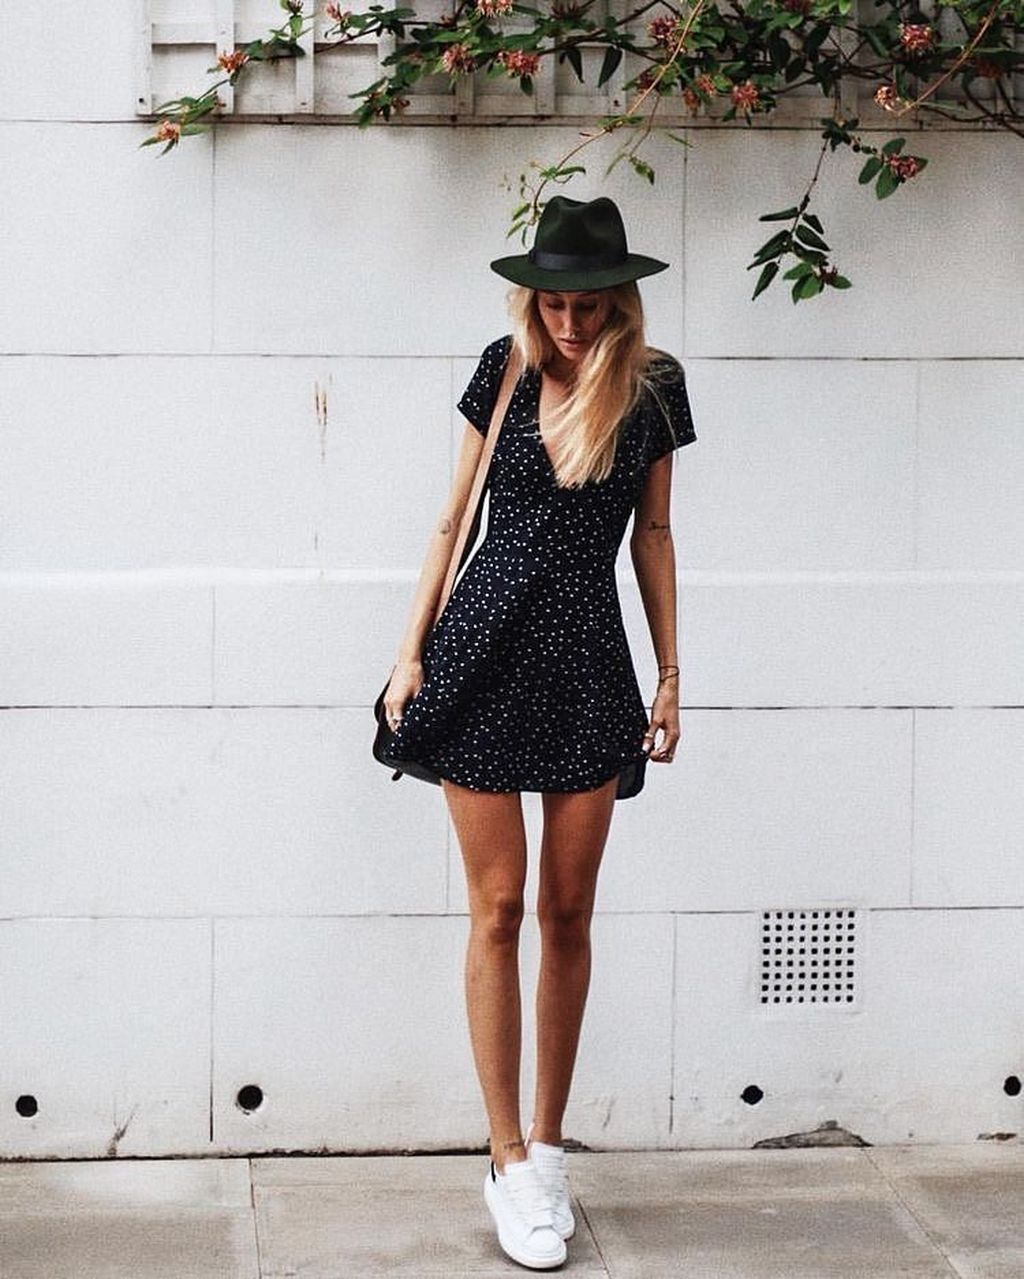 48 Classy Summer Outfits Ideas You Should Try